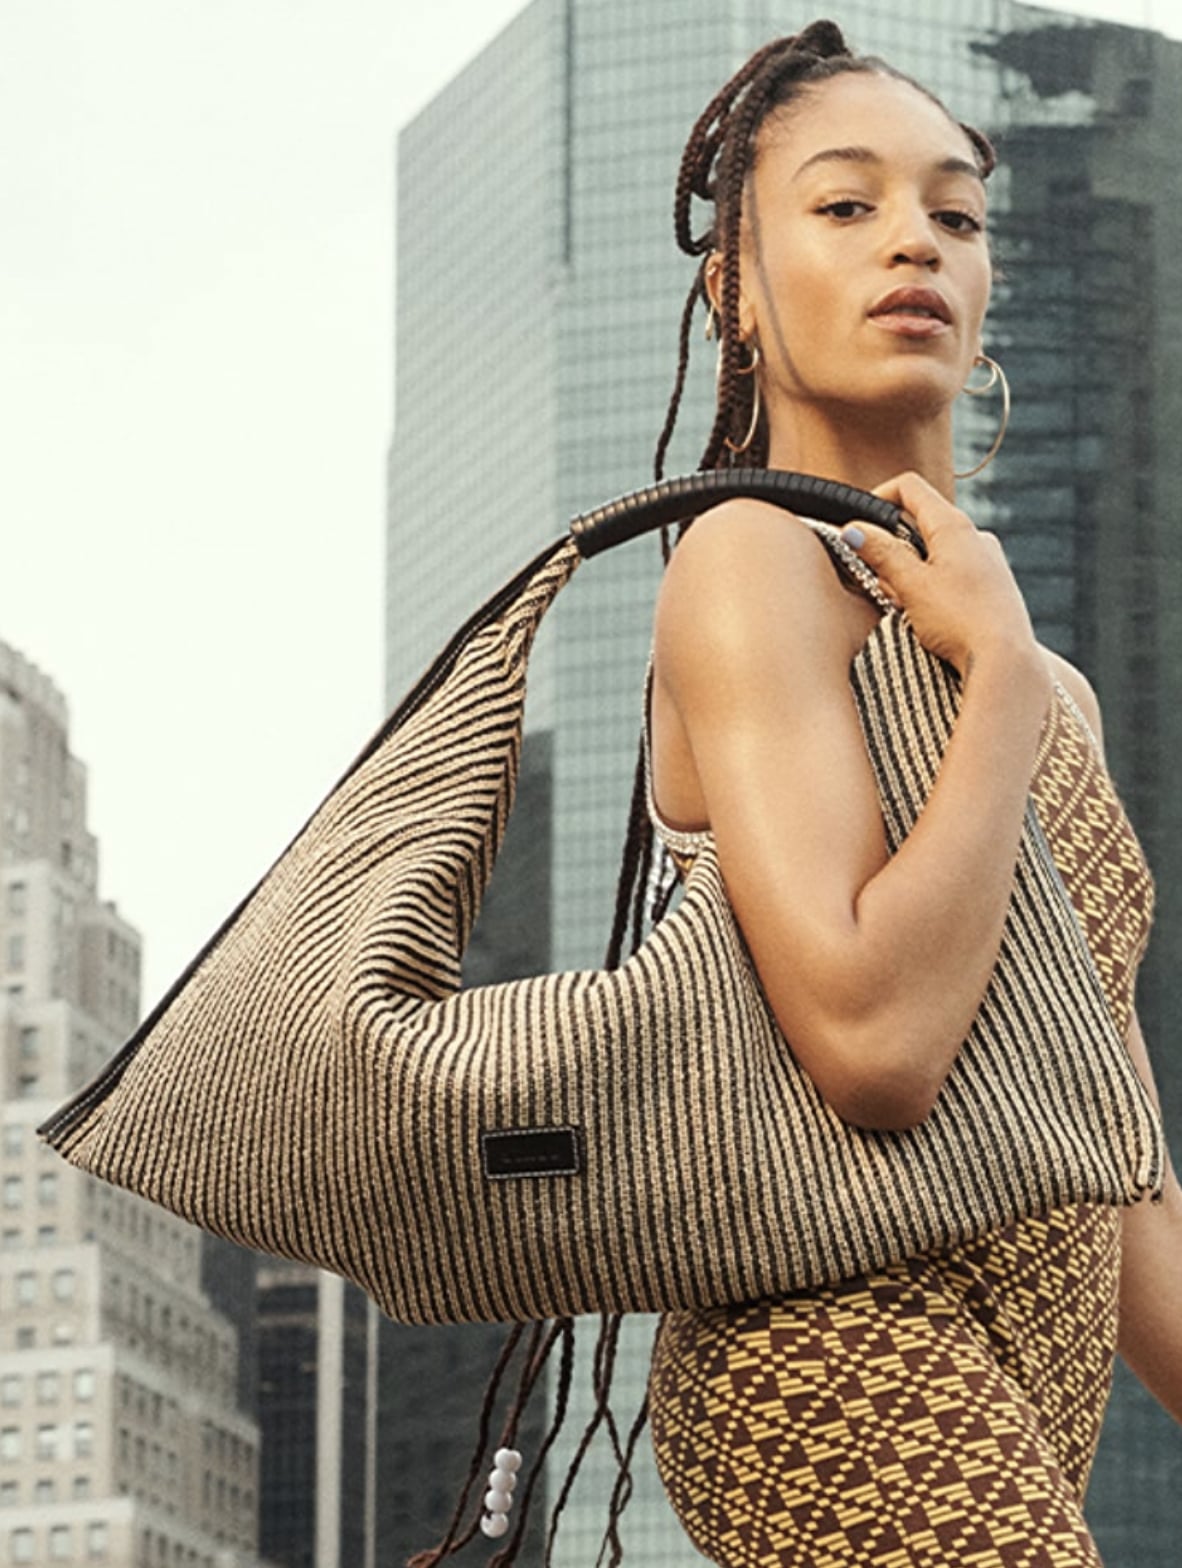 9 Designer Bags Worth the Investment - FROM LUXE WITH LOVE